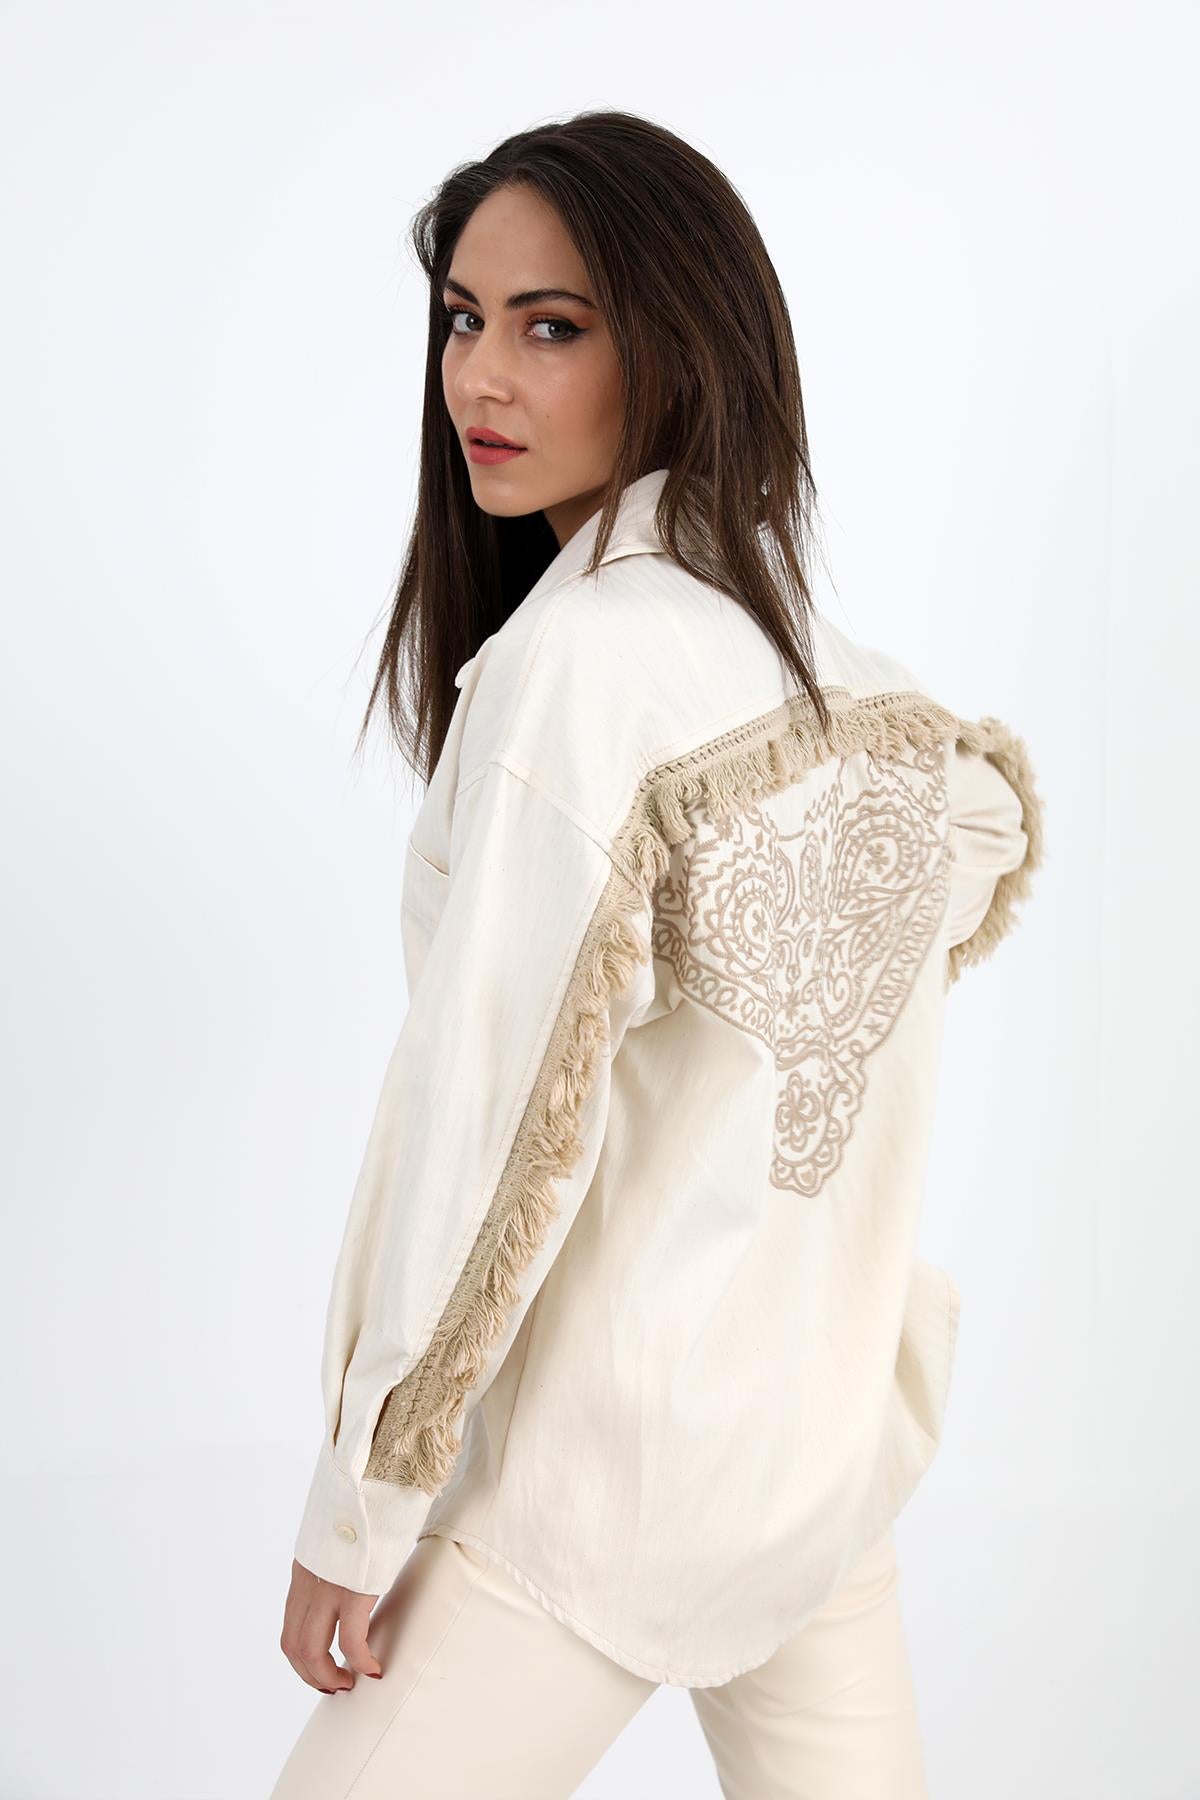 Women's Shirt Gabardine with Embroidered Tassels on the Back - Beige - STREETMODE ™